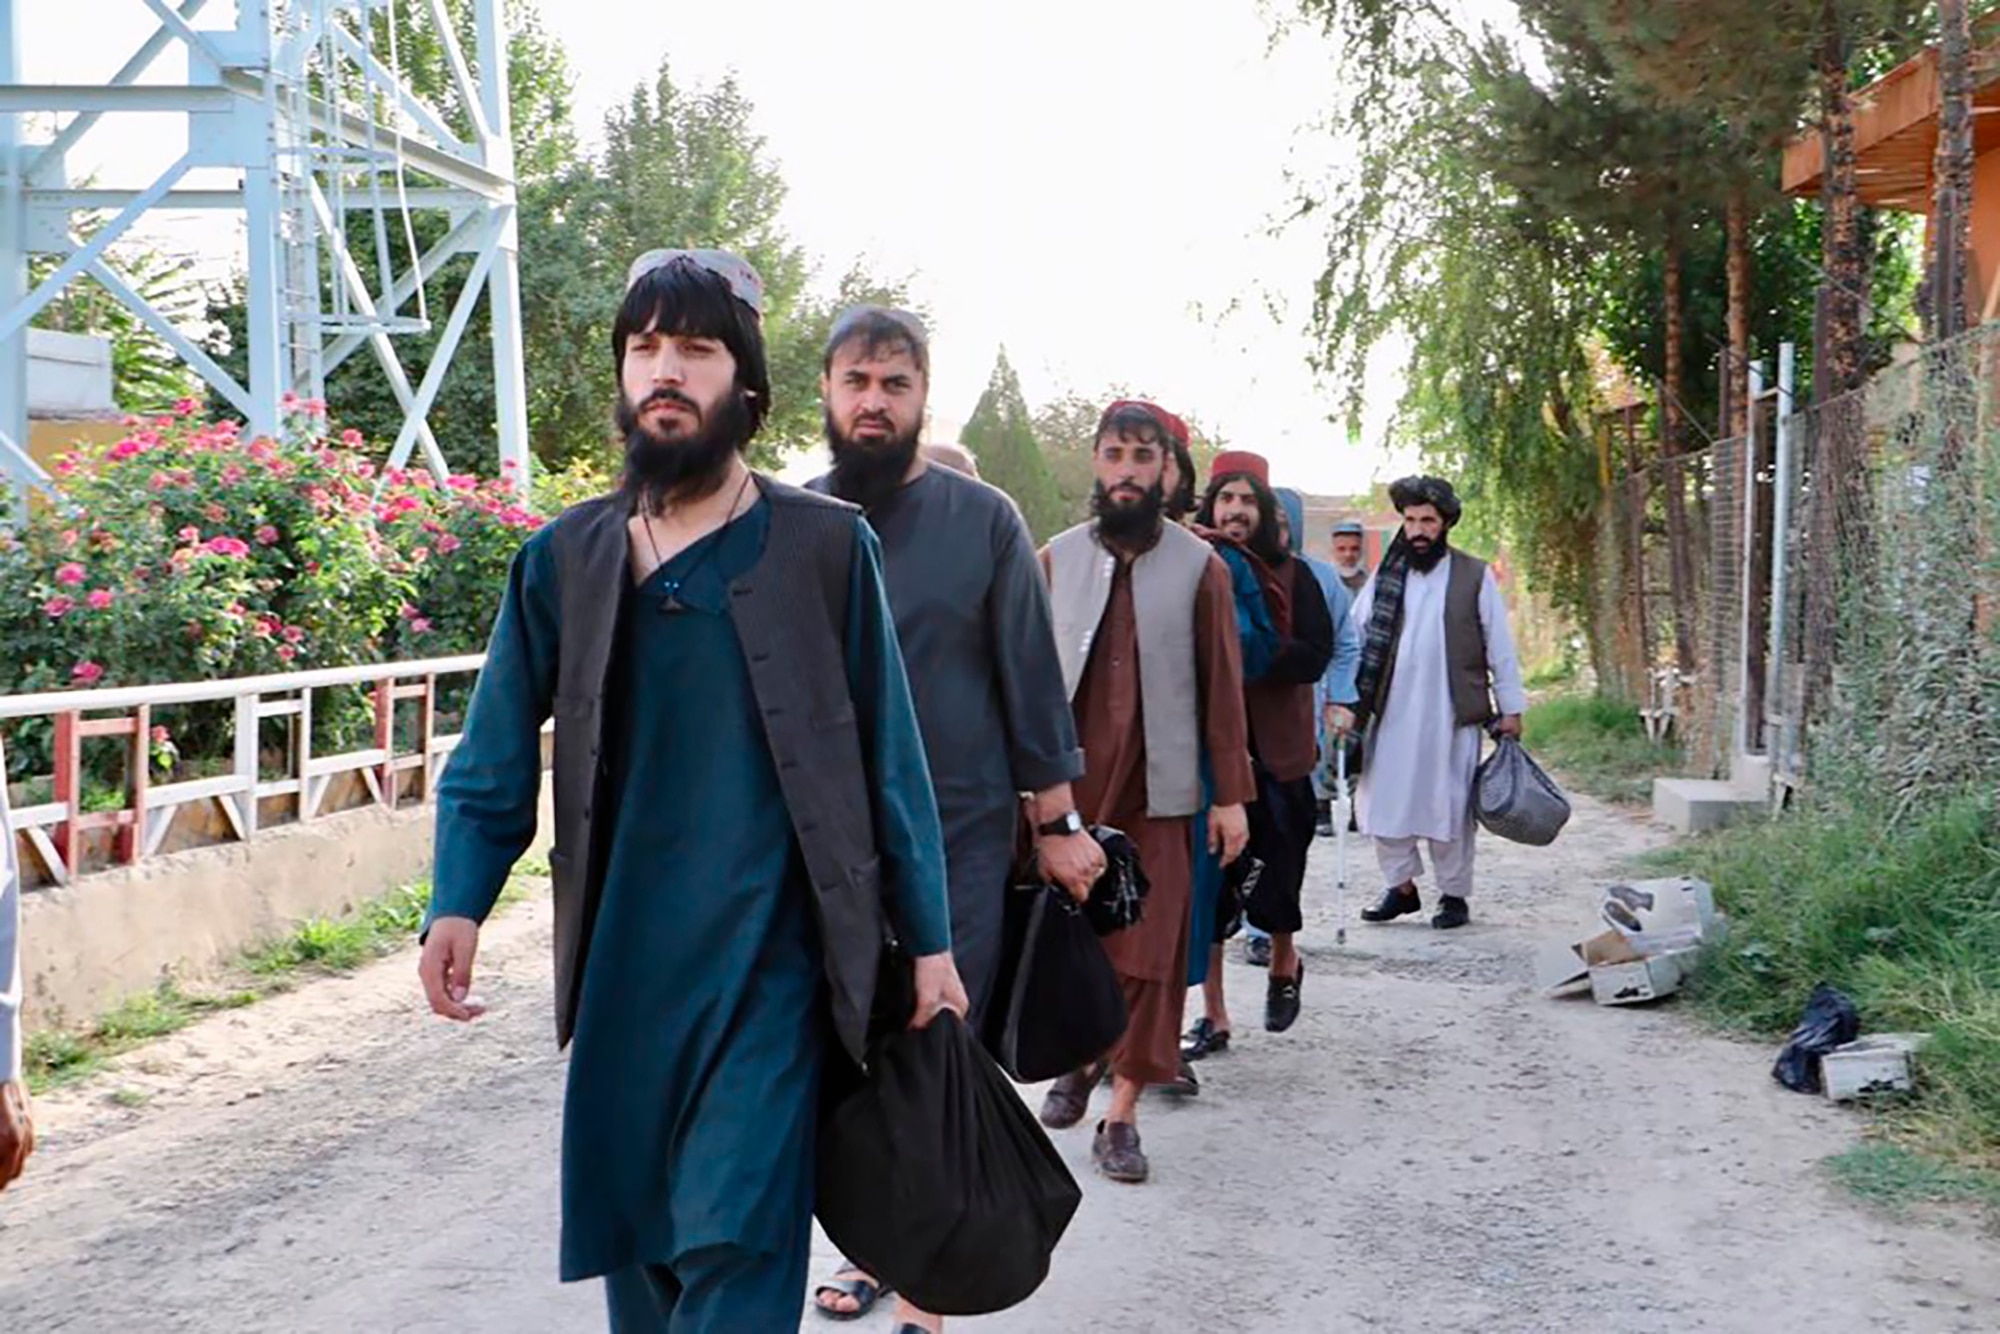 Taliban prisoners are released from Pul-e-Charkhi jail in Kabul, Afghanistan, 13 August 2020.